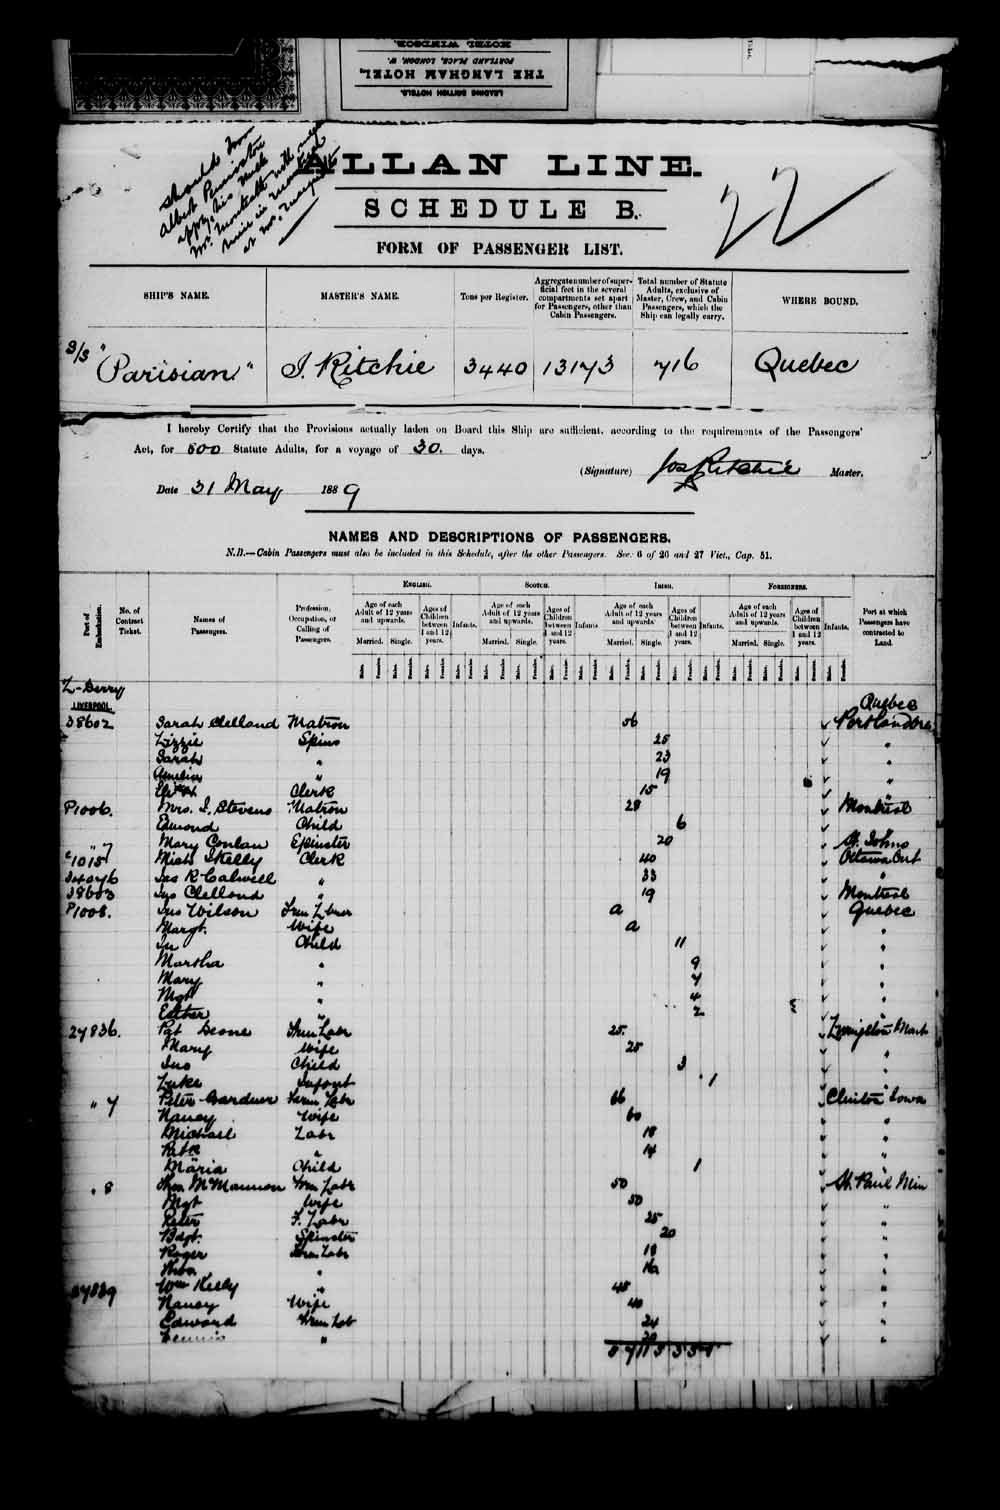 Digitized page of Passenger Lists for Image No.: e003549683